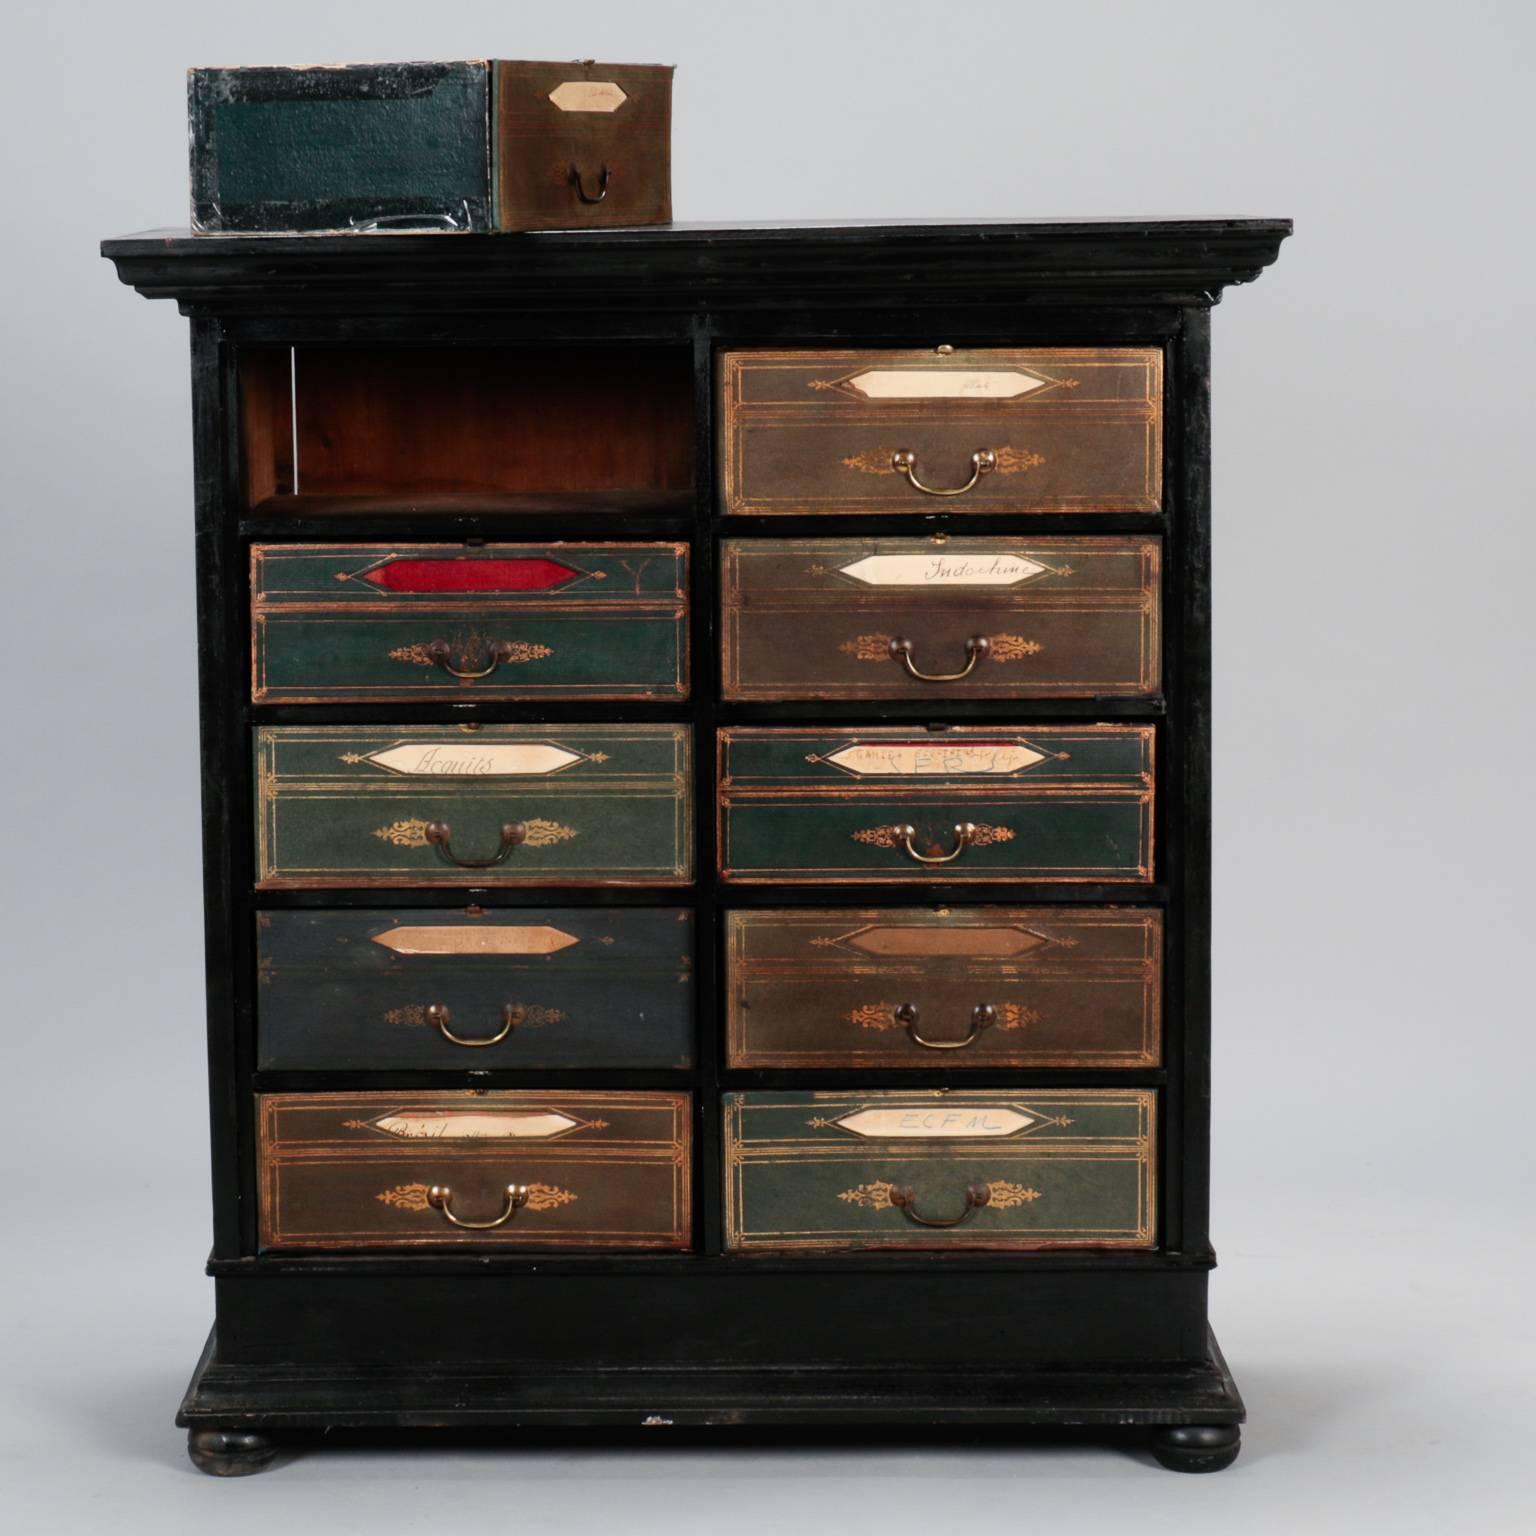 Circa 1890s oak chest has an ebonized finish and ten removable suitcase style drawers. Drawers are made of heavy paperboard and covered in paper with leather fronts and brass hardware. Drawer fronts fold down and are secured with clip at top.